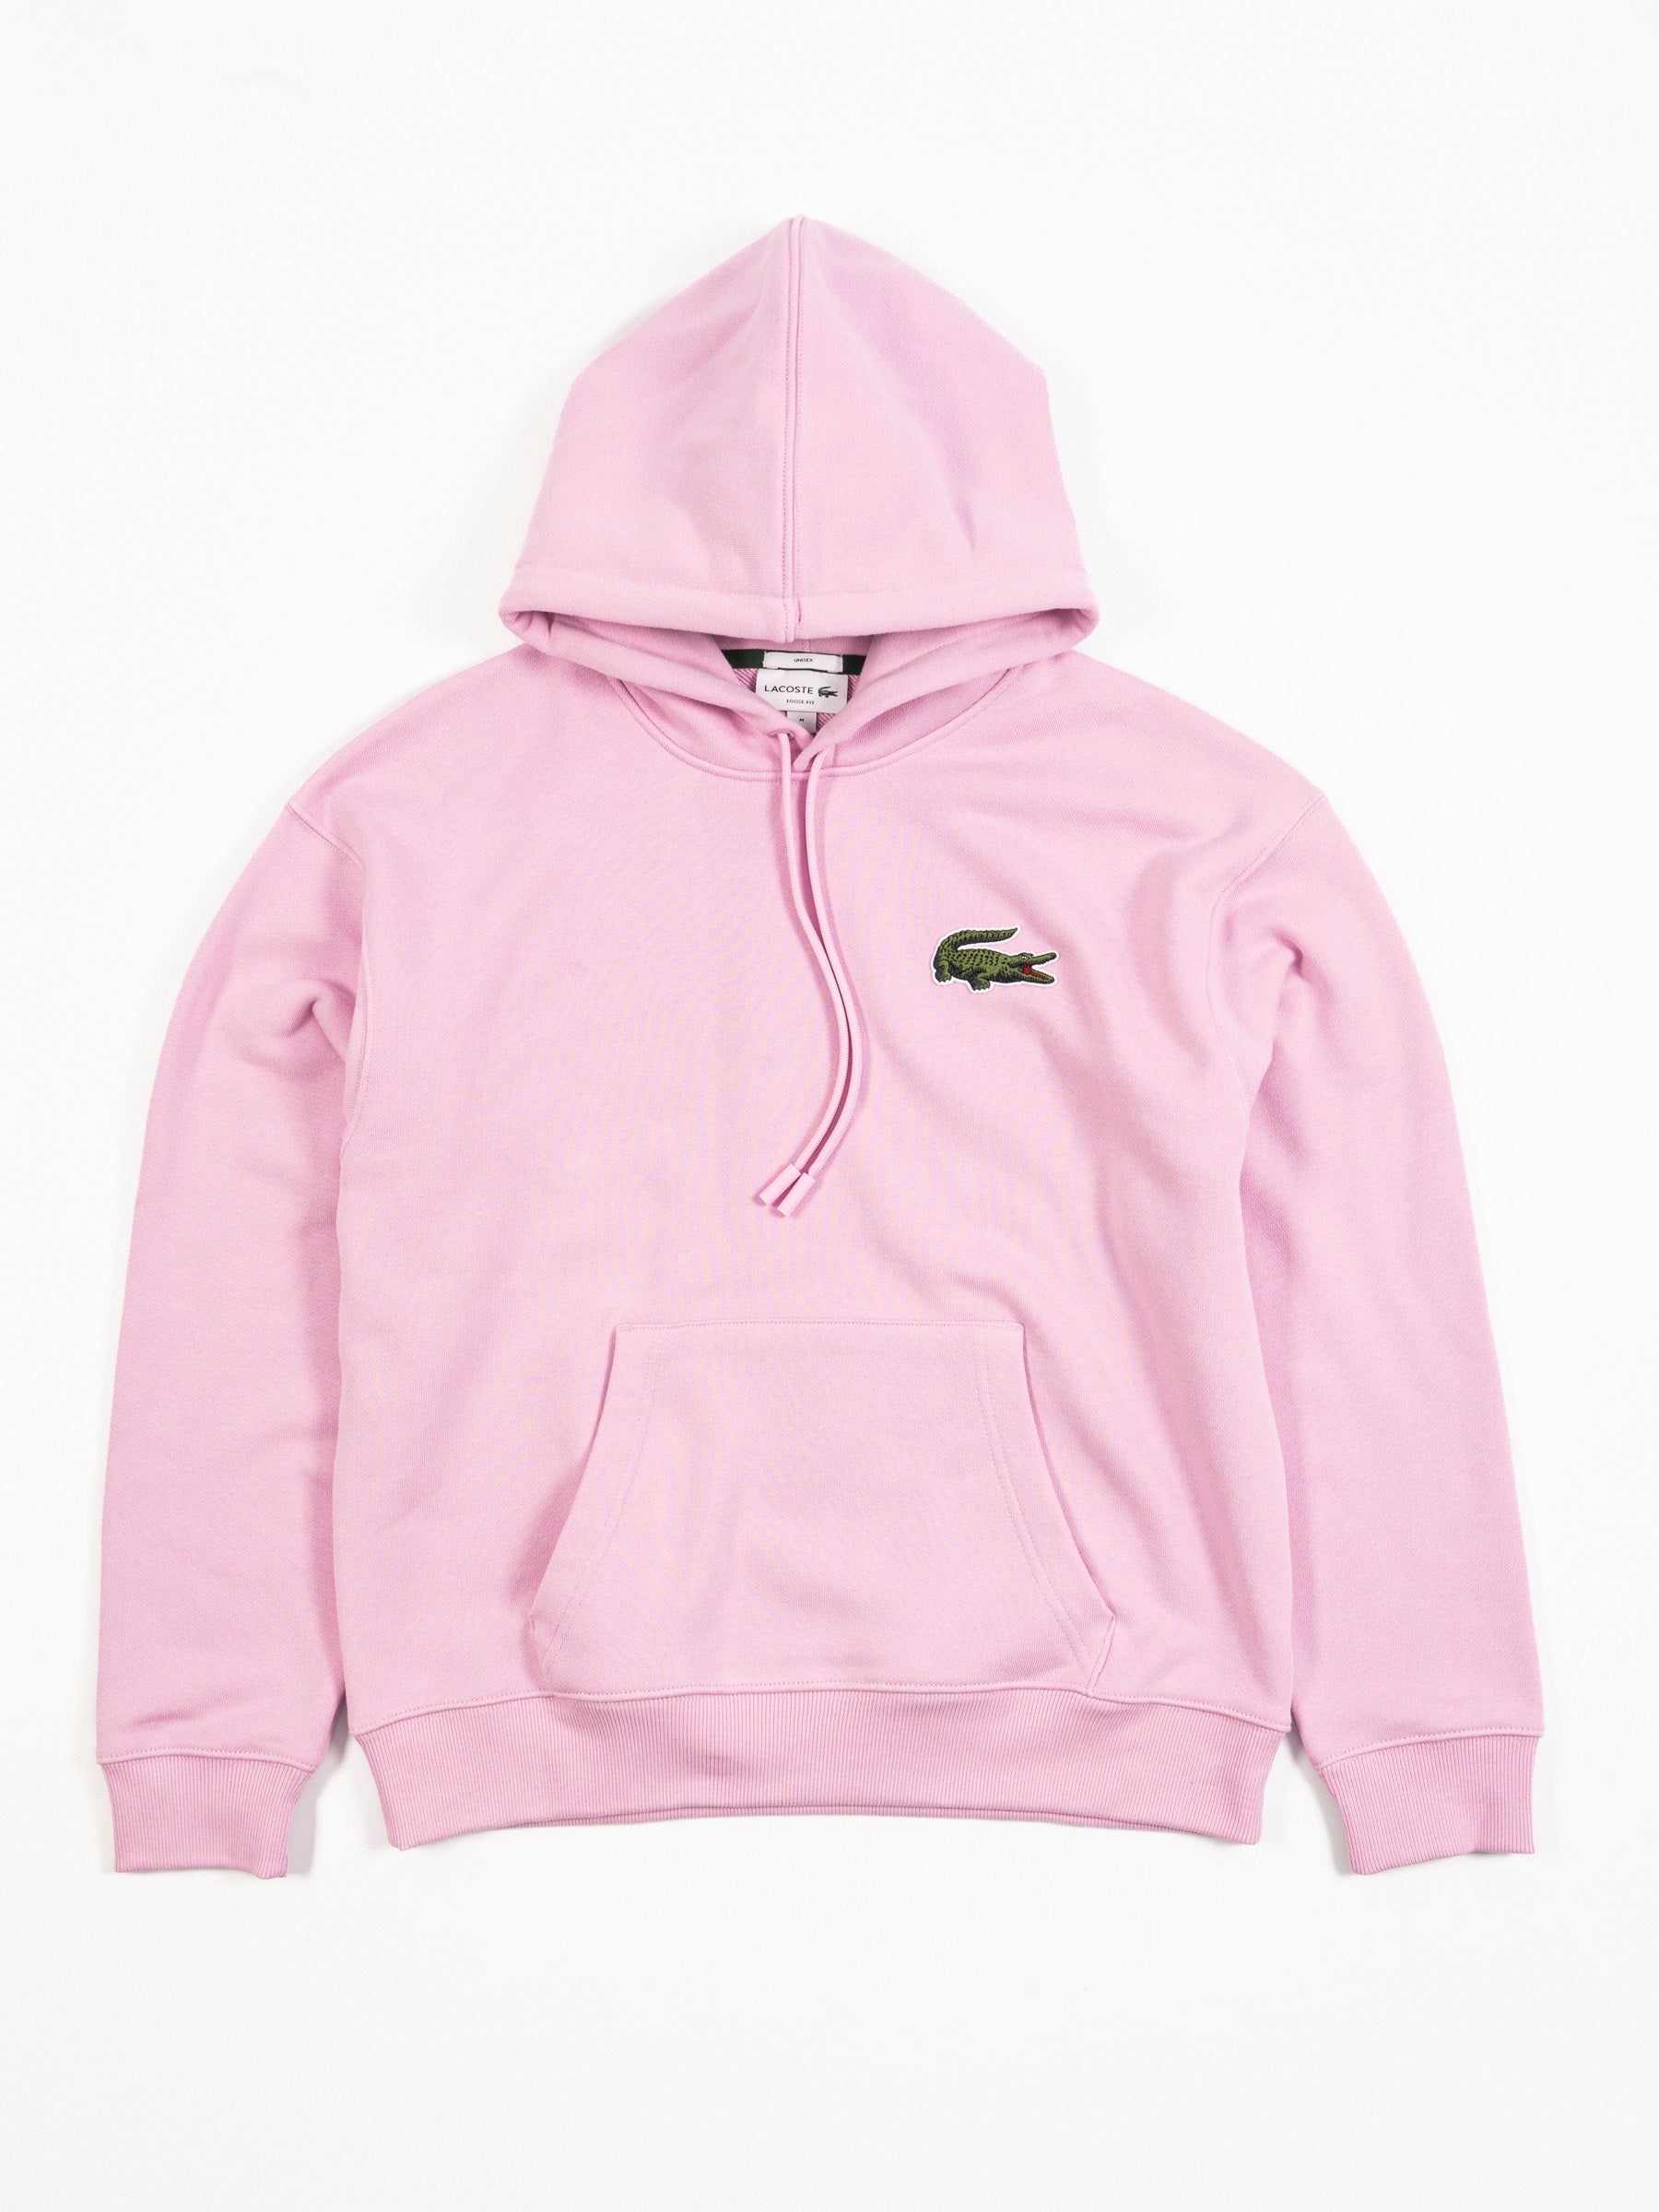 Unisex Loose Fit Hooded Sweater Pink